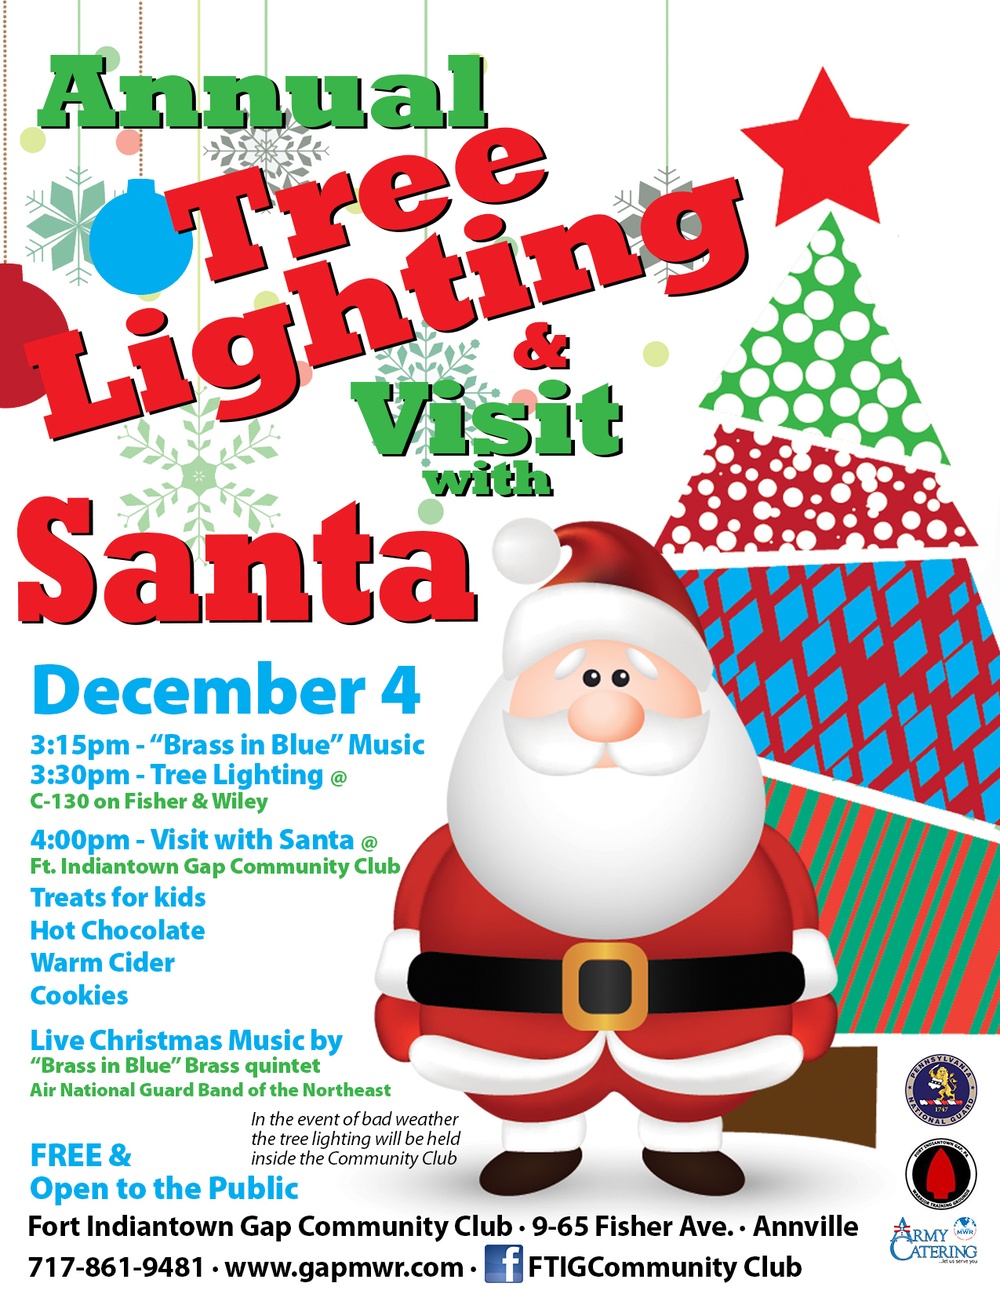 Public invited to tree lighting ceremony at Fort Indiantown Gap